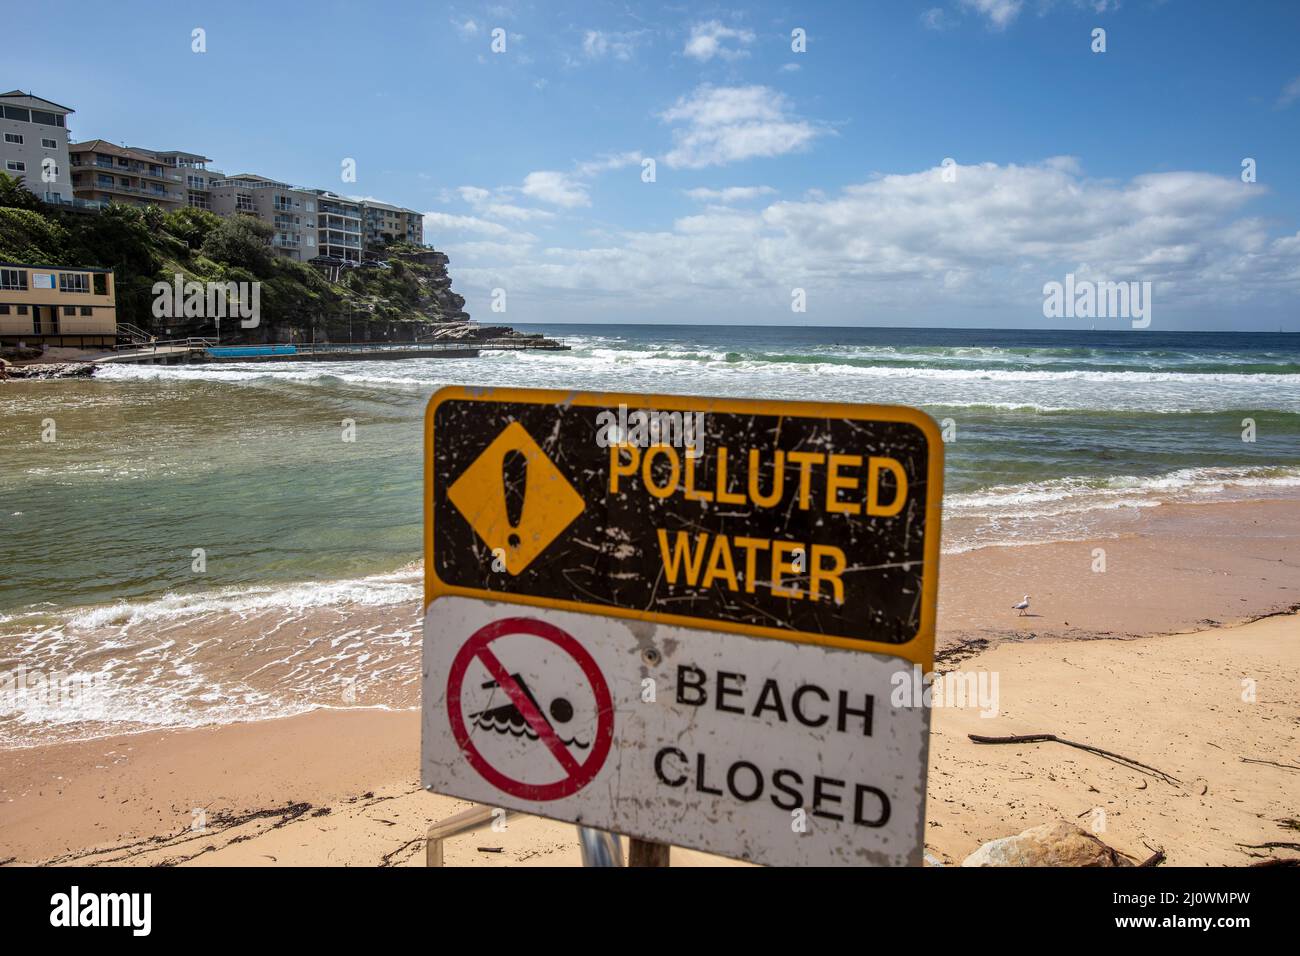 Queenscliff beach in Manly Sydney is closed due to polluted water arising from the floods and heavy rains in March 2022,NSW,Australia Stock Photo